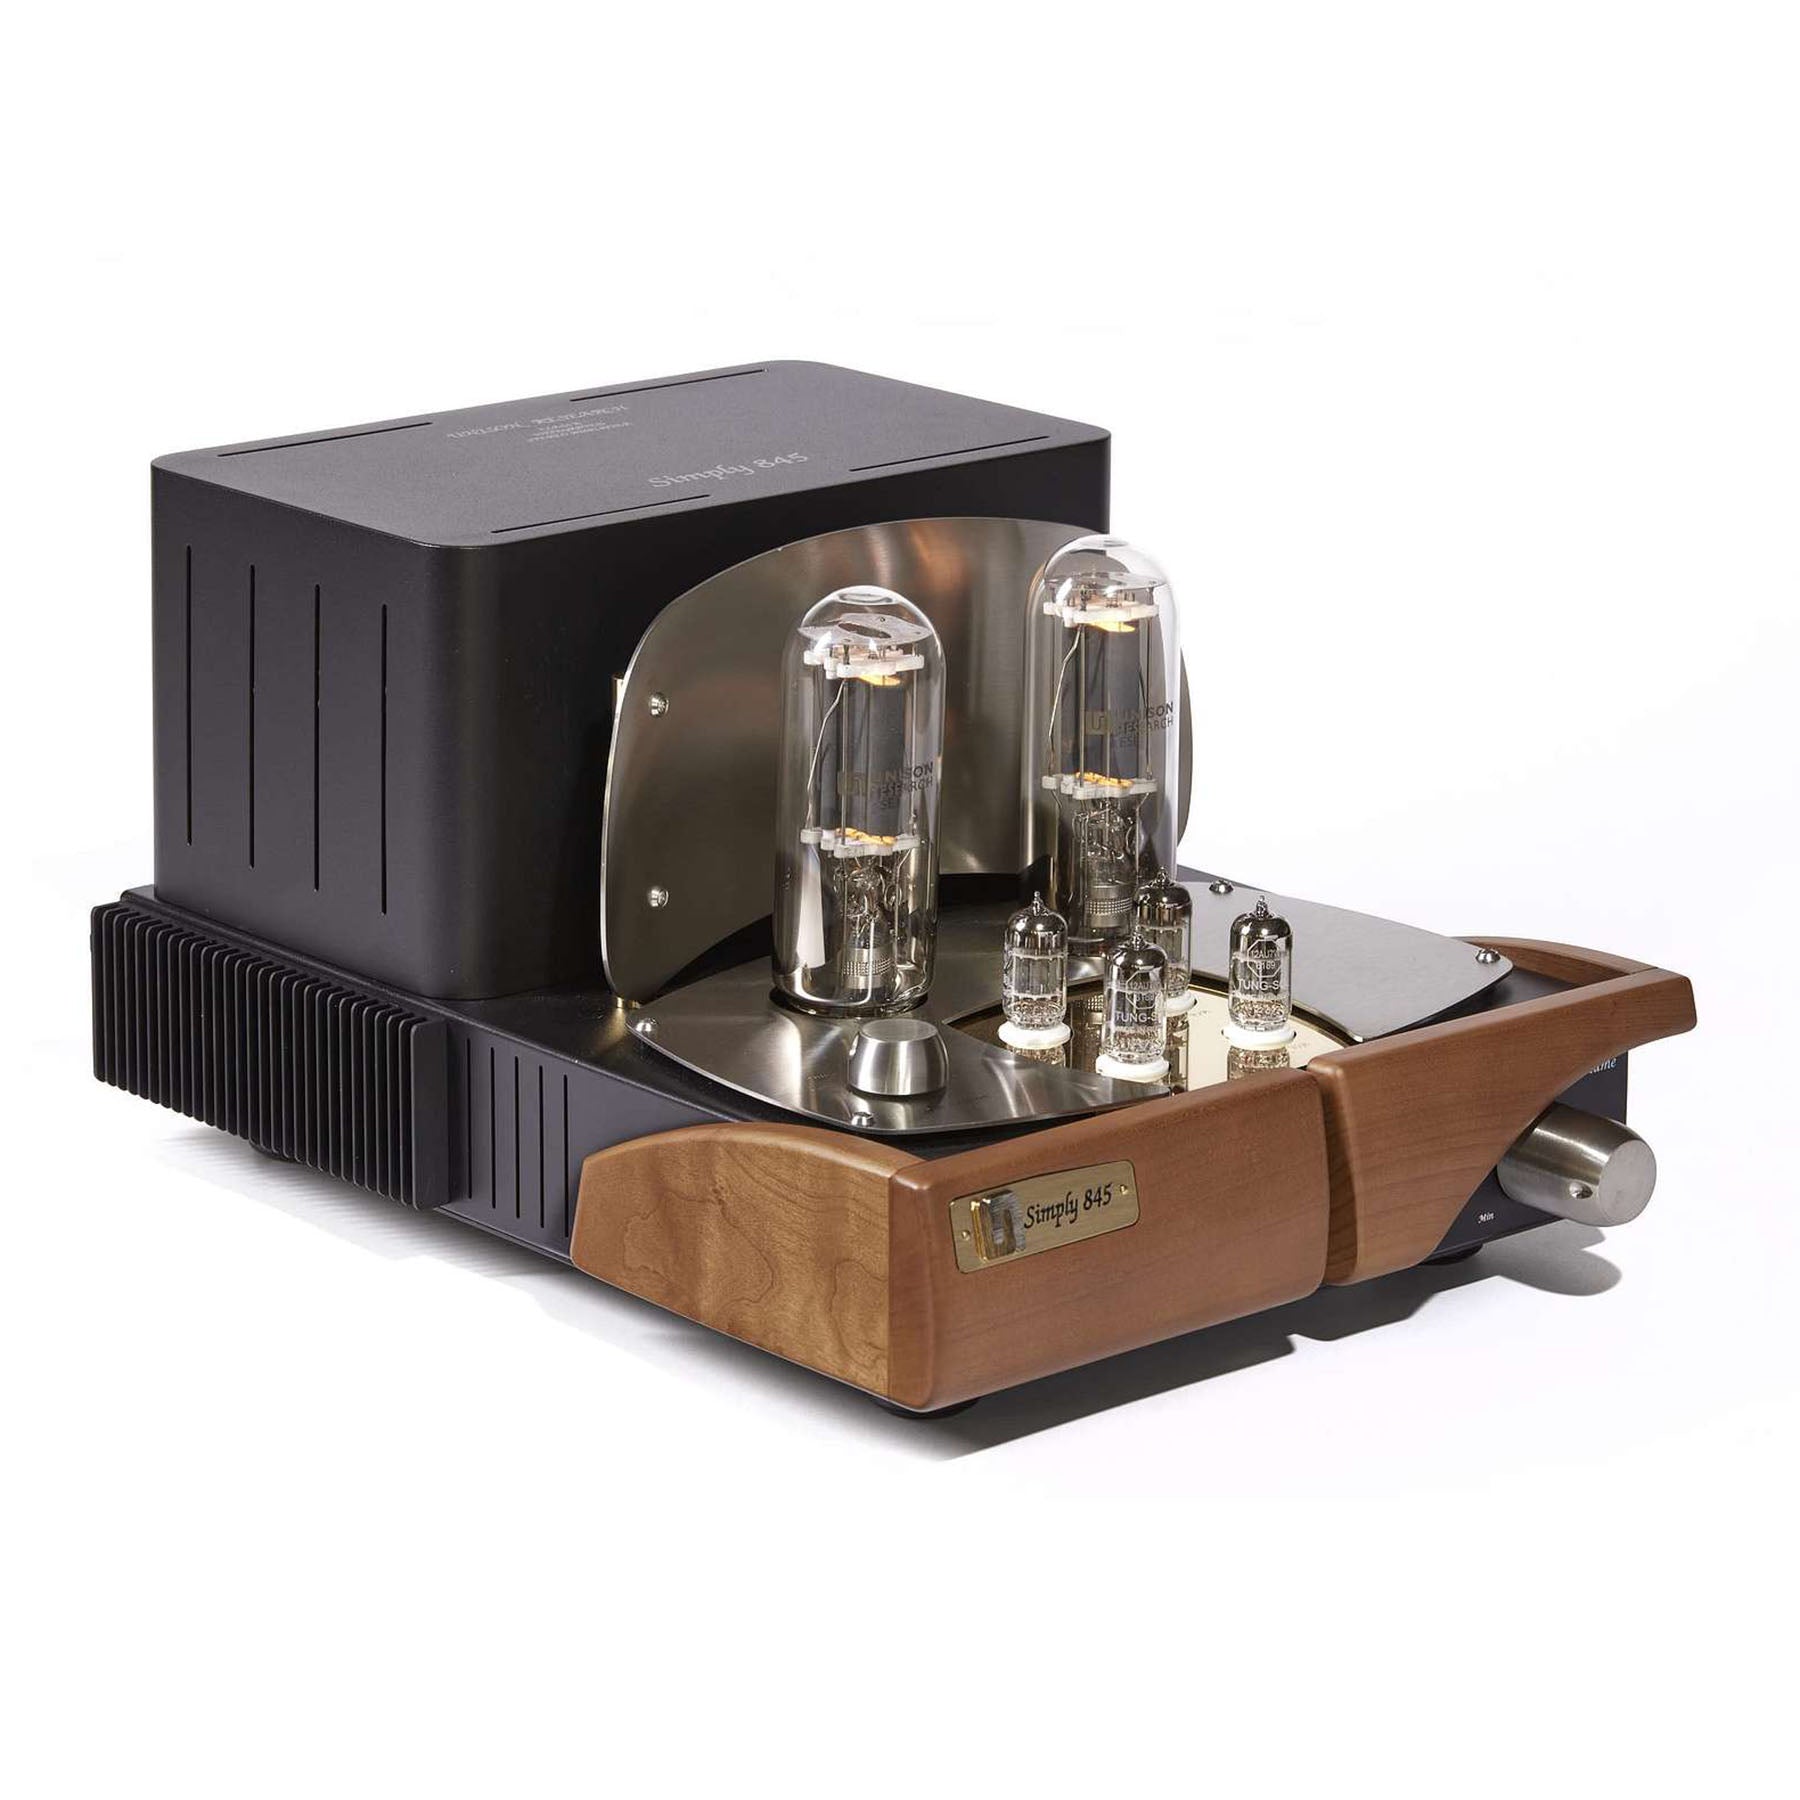 Unison Research Simply 845 Integrated Tube Amplifier